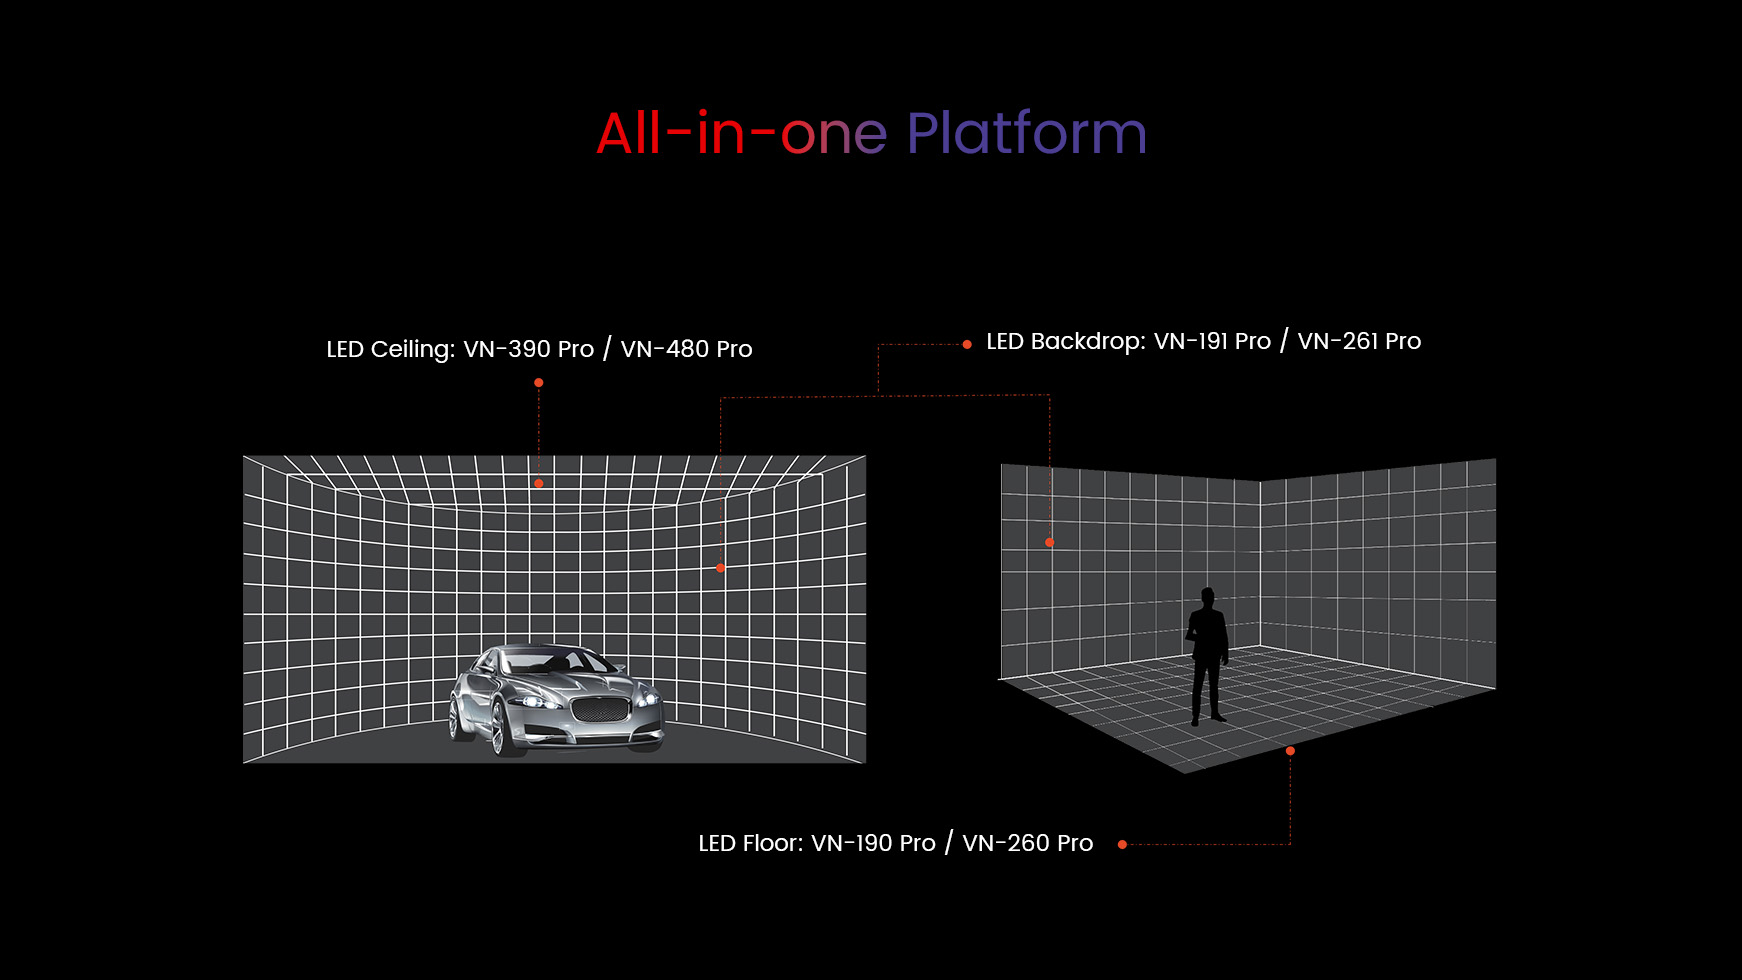 All-in-one Platform